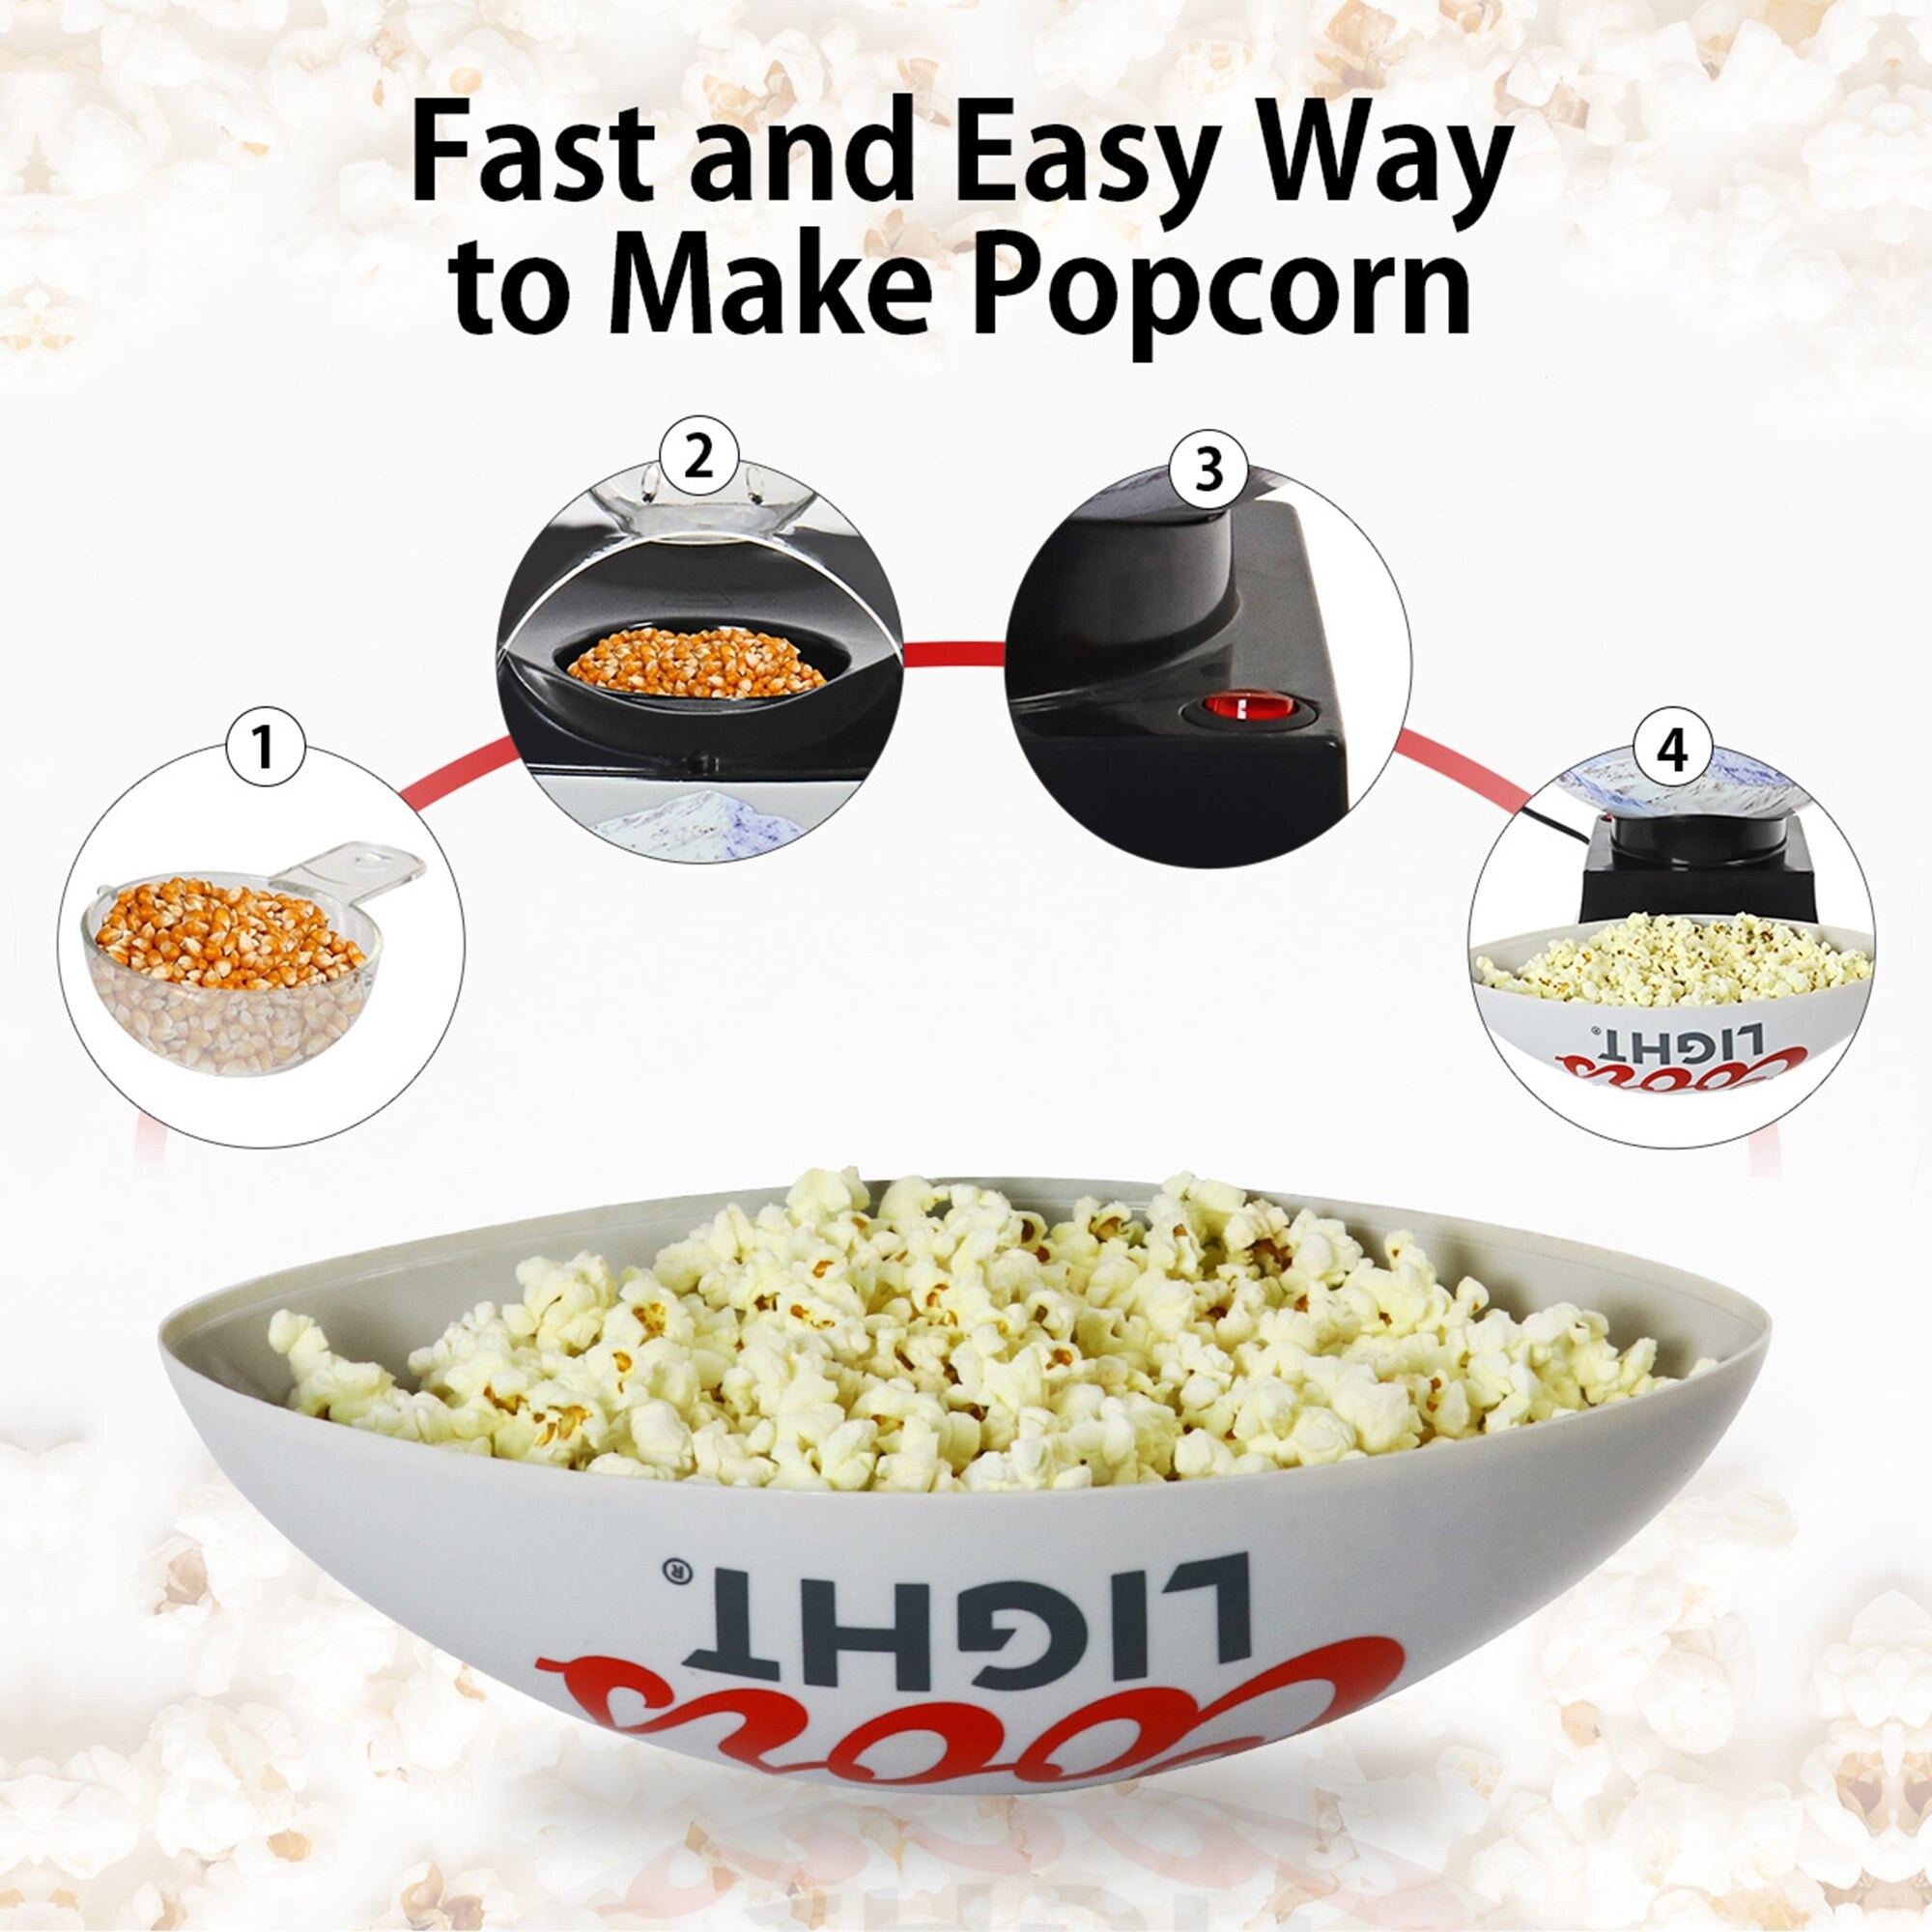 https://ak1.ostkcdn.com/images/products/is/images/direct/5e5db200c86dc94fa2e565e9d84c7d659a2eaee9/Coors-Light-Hot-Air-Popcorn-Maker-and-Football-Serving-Bowl.jpg